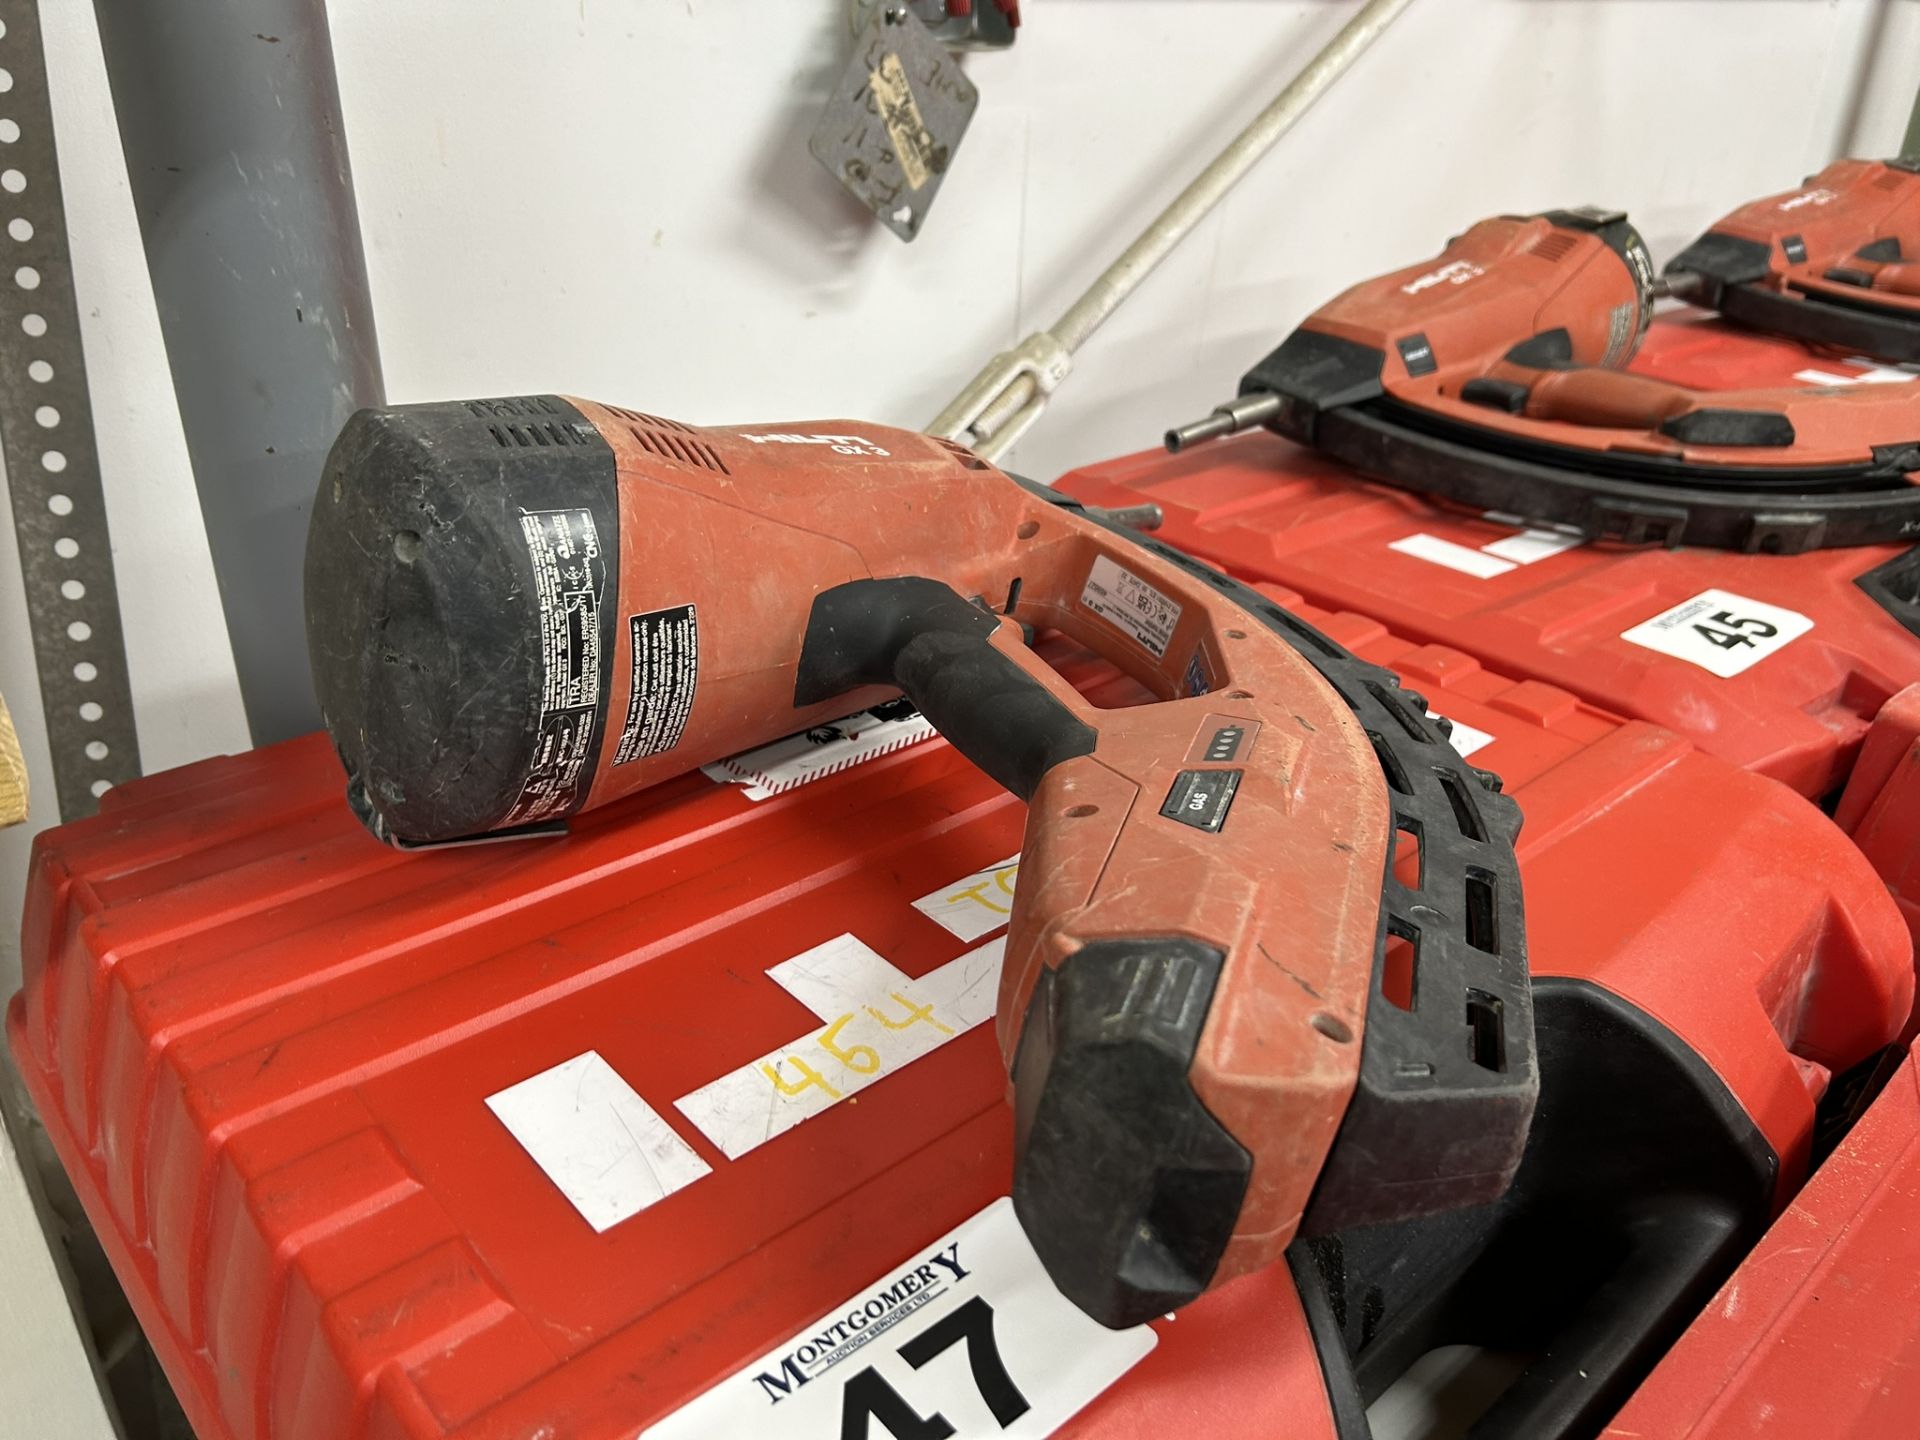 HILTI GX 3 GAS-ACTUATED FASTENING TOOL GAS NAILER WITH SINGLE POWER SOURCE FOR DRYWALL TRACK, - Image 4 of 6